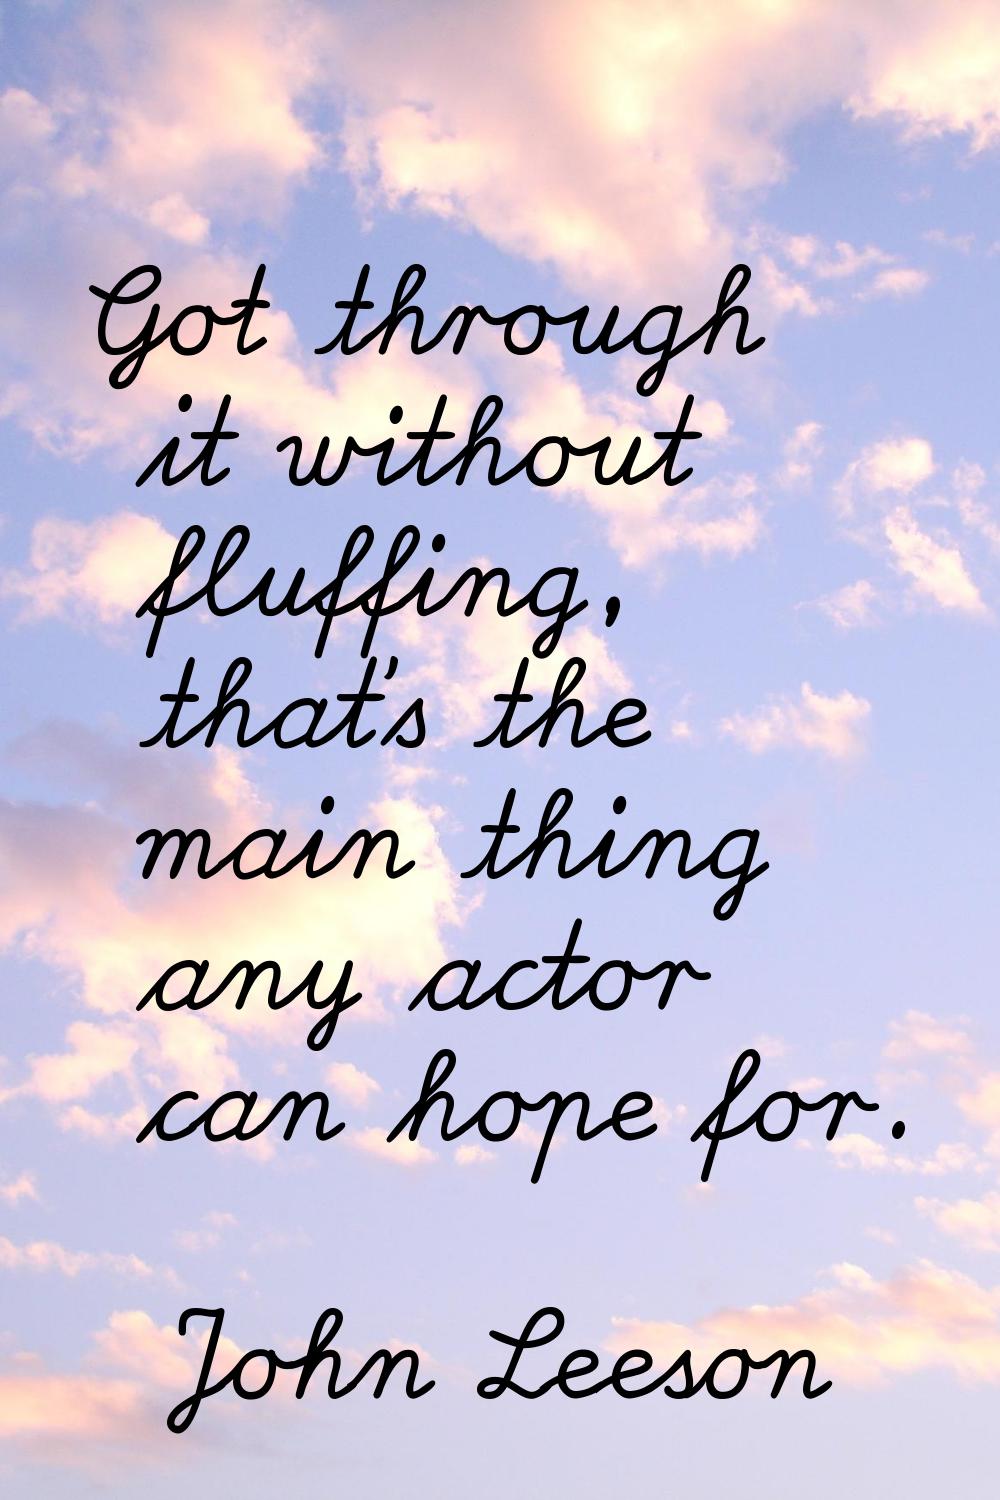 Got through it without fluffing, that's the main thing any actor can hope for.